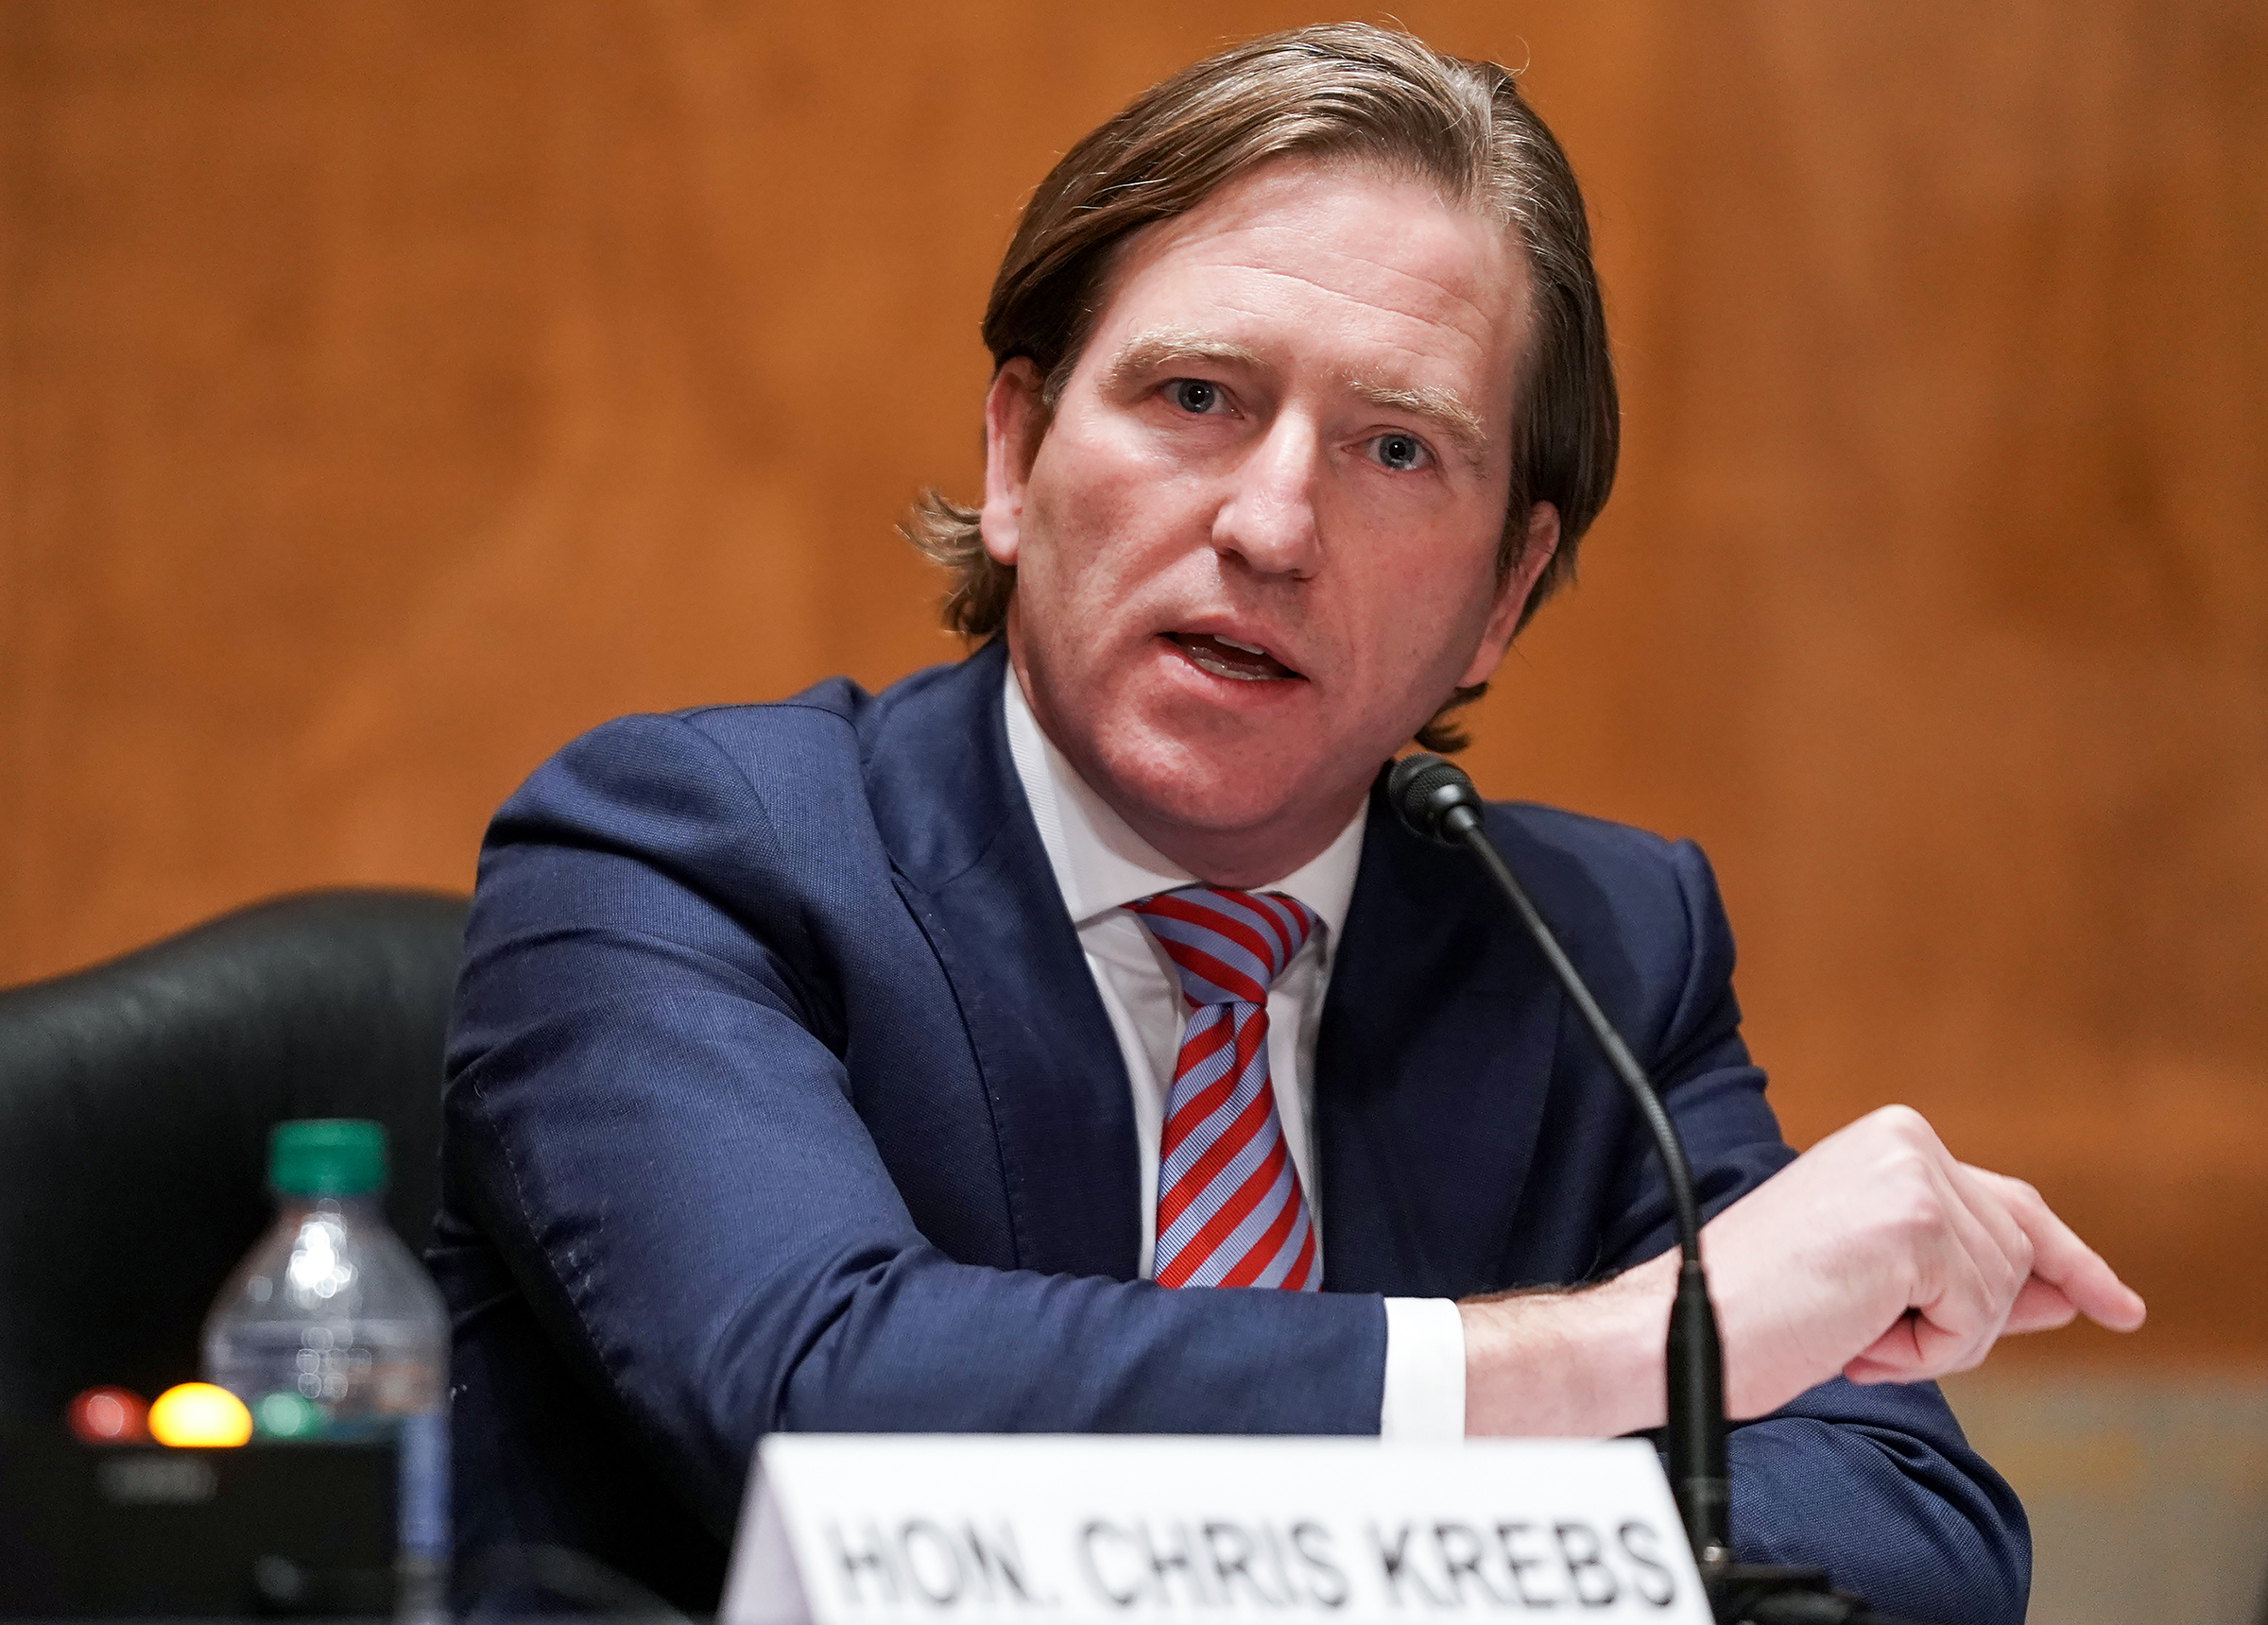 Chris Krebs, former director of the Cybersecurity and Infrastructure Security Agency, testifies during a Senate Homeland Security and Governmental Affairs Committee hearing to discuss election security and the 2020 election process on December 16, 2020 in Washington, DC. (Greg Nash—Pool/Getty Images)